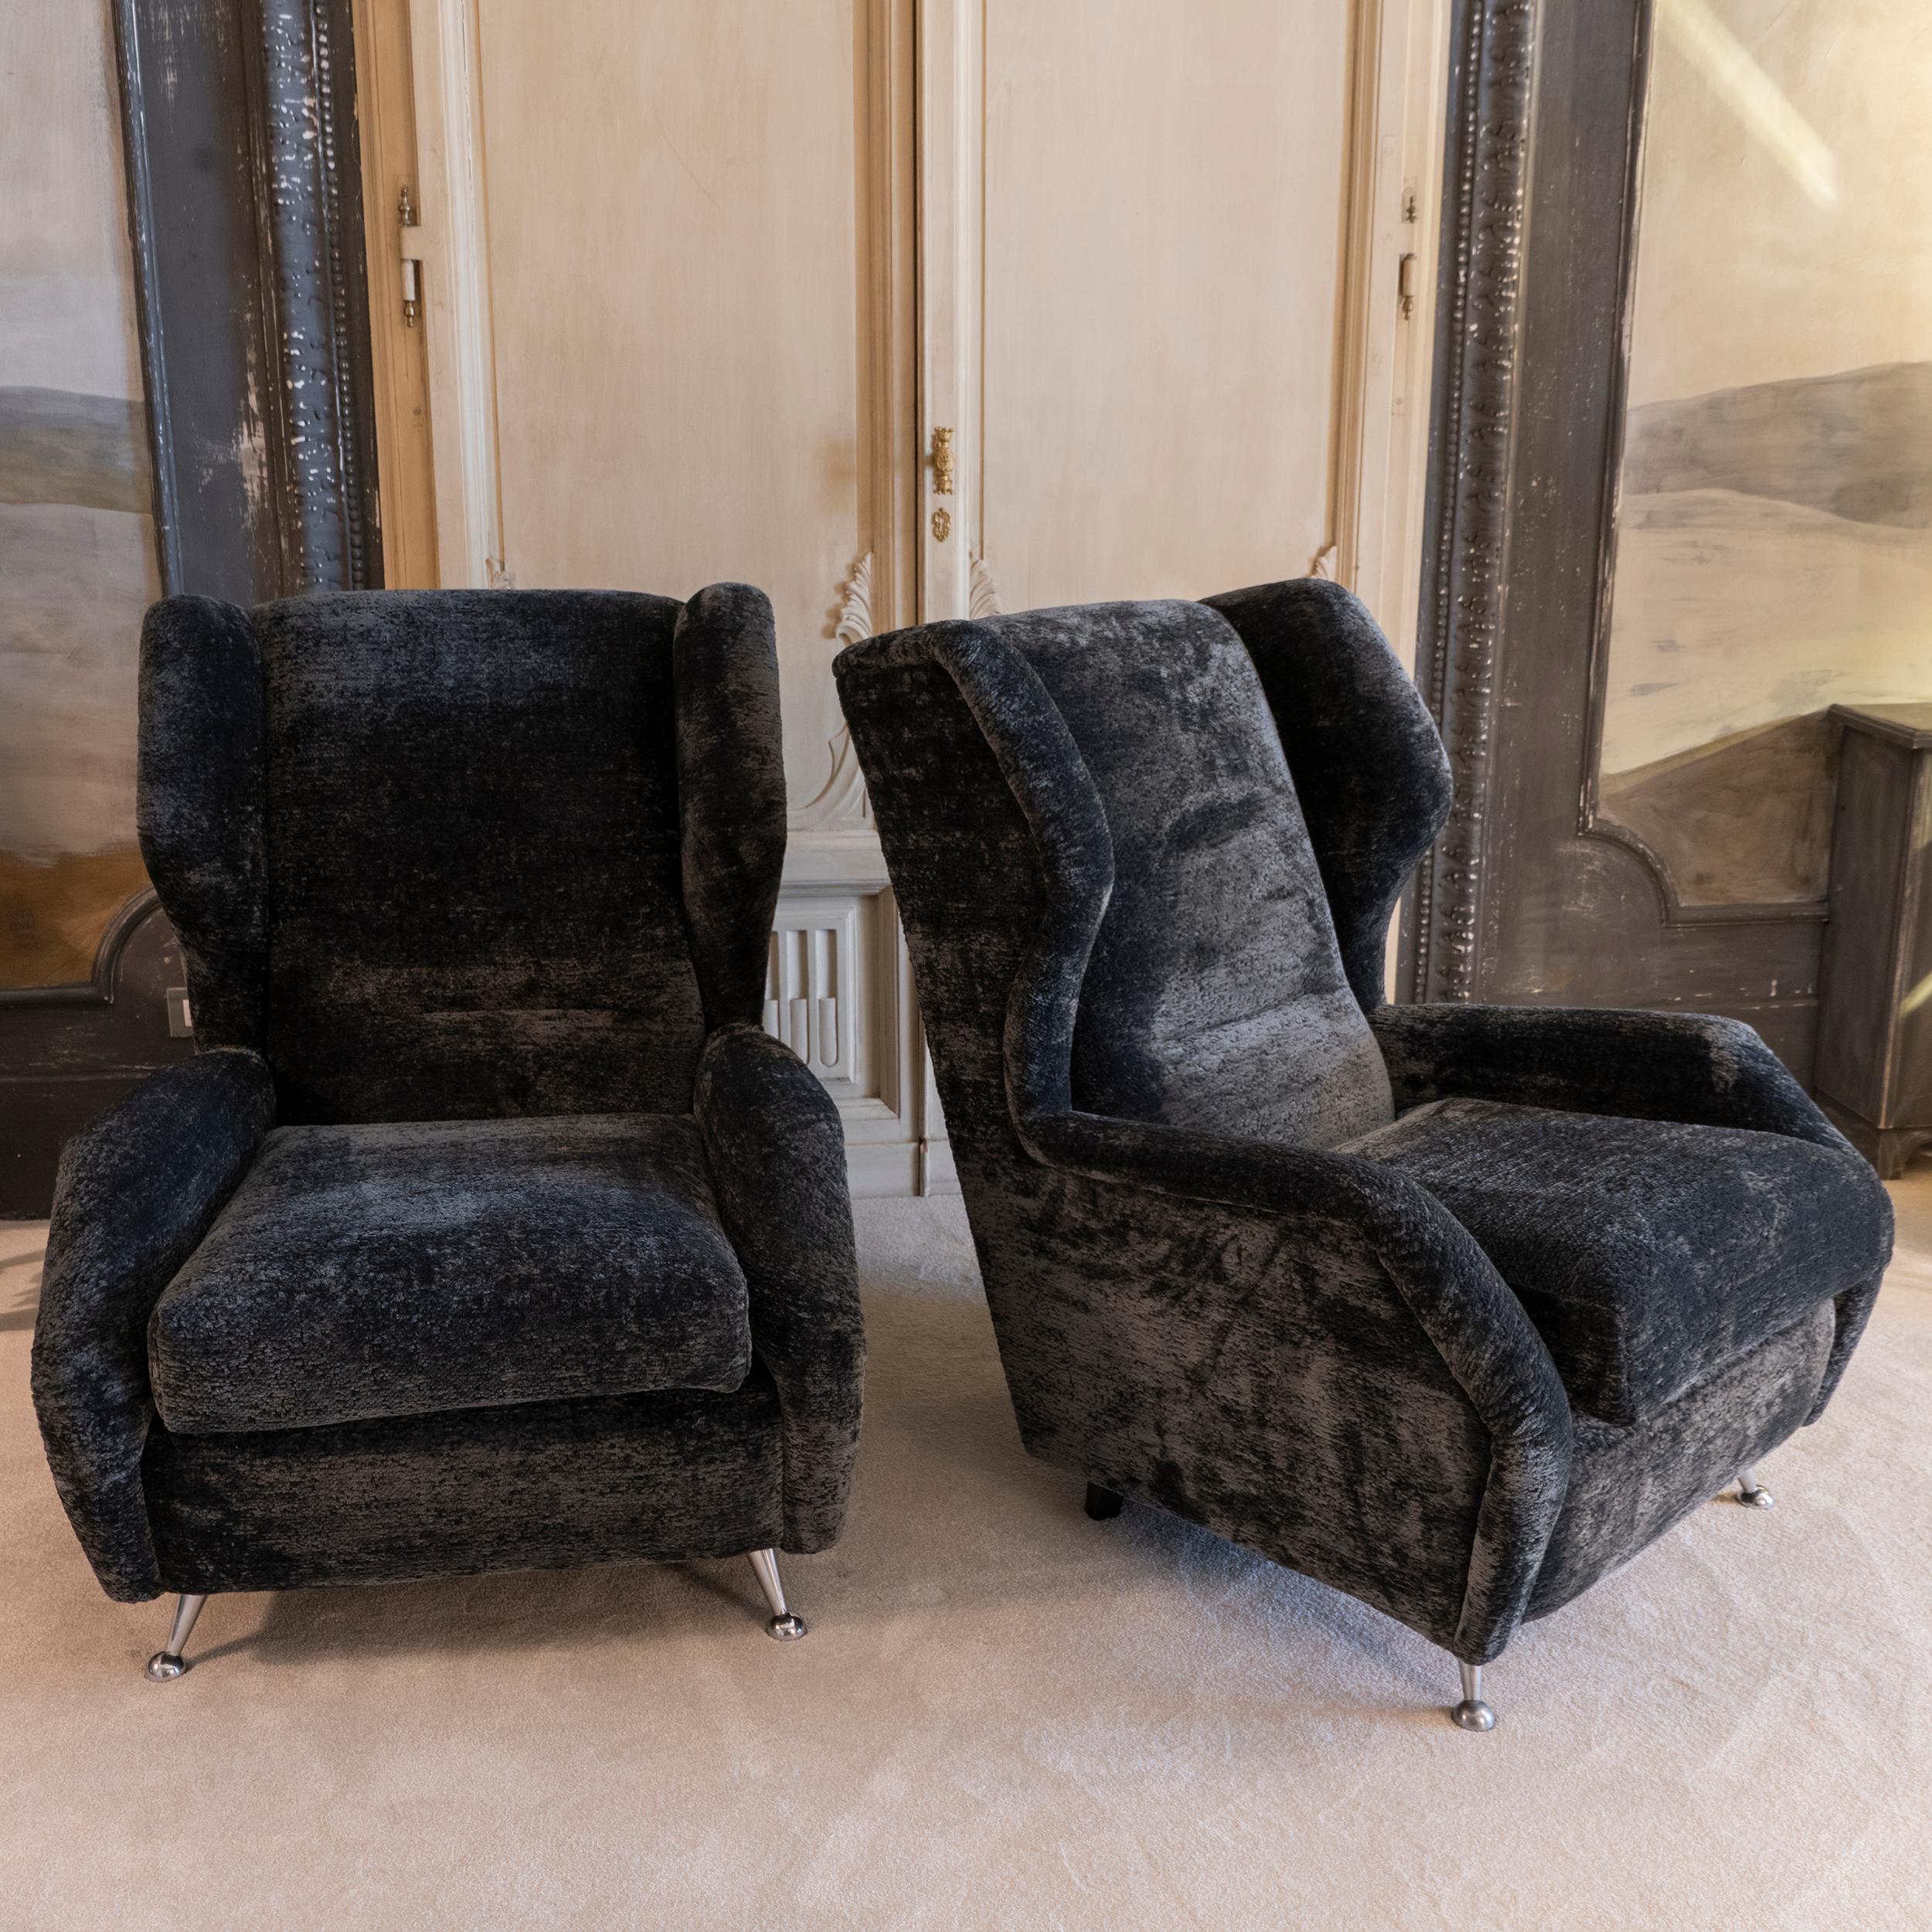 1950's Italian Bergere Gun Metal Grey Chenille, Wood and Chrome Details For Sale 9